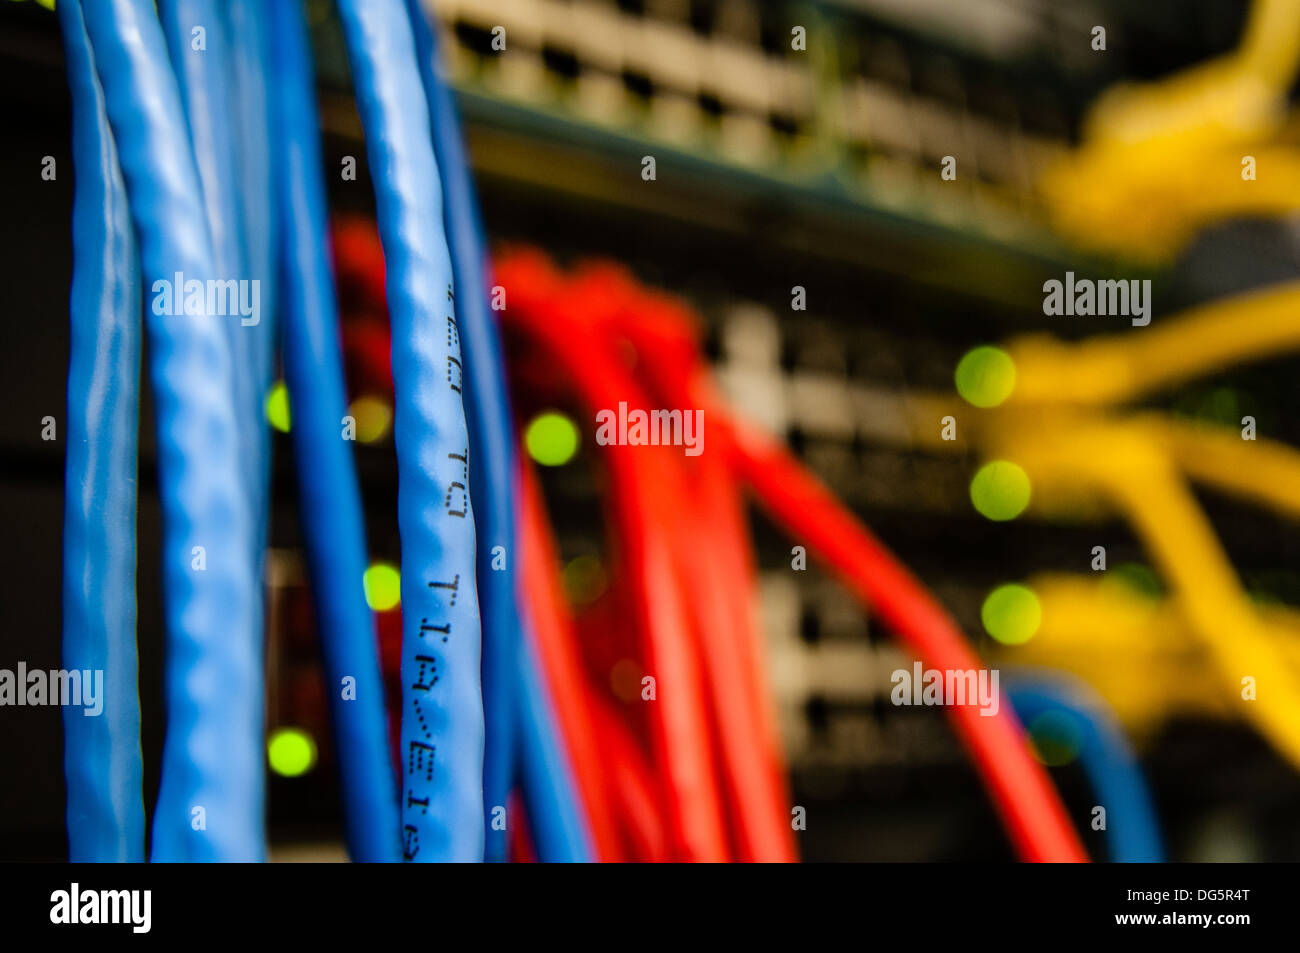 Network switches in cloud computing data center server rack Stock Photo